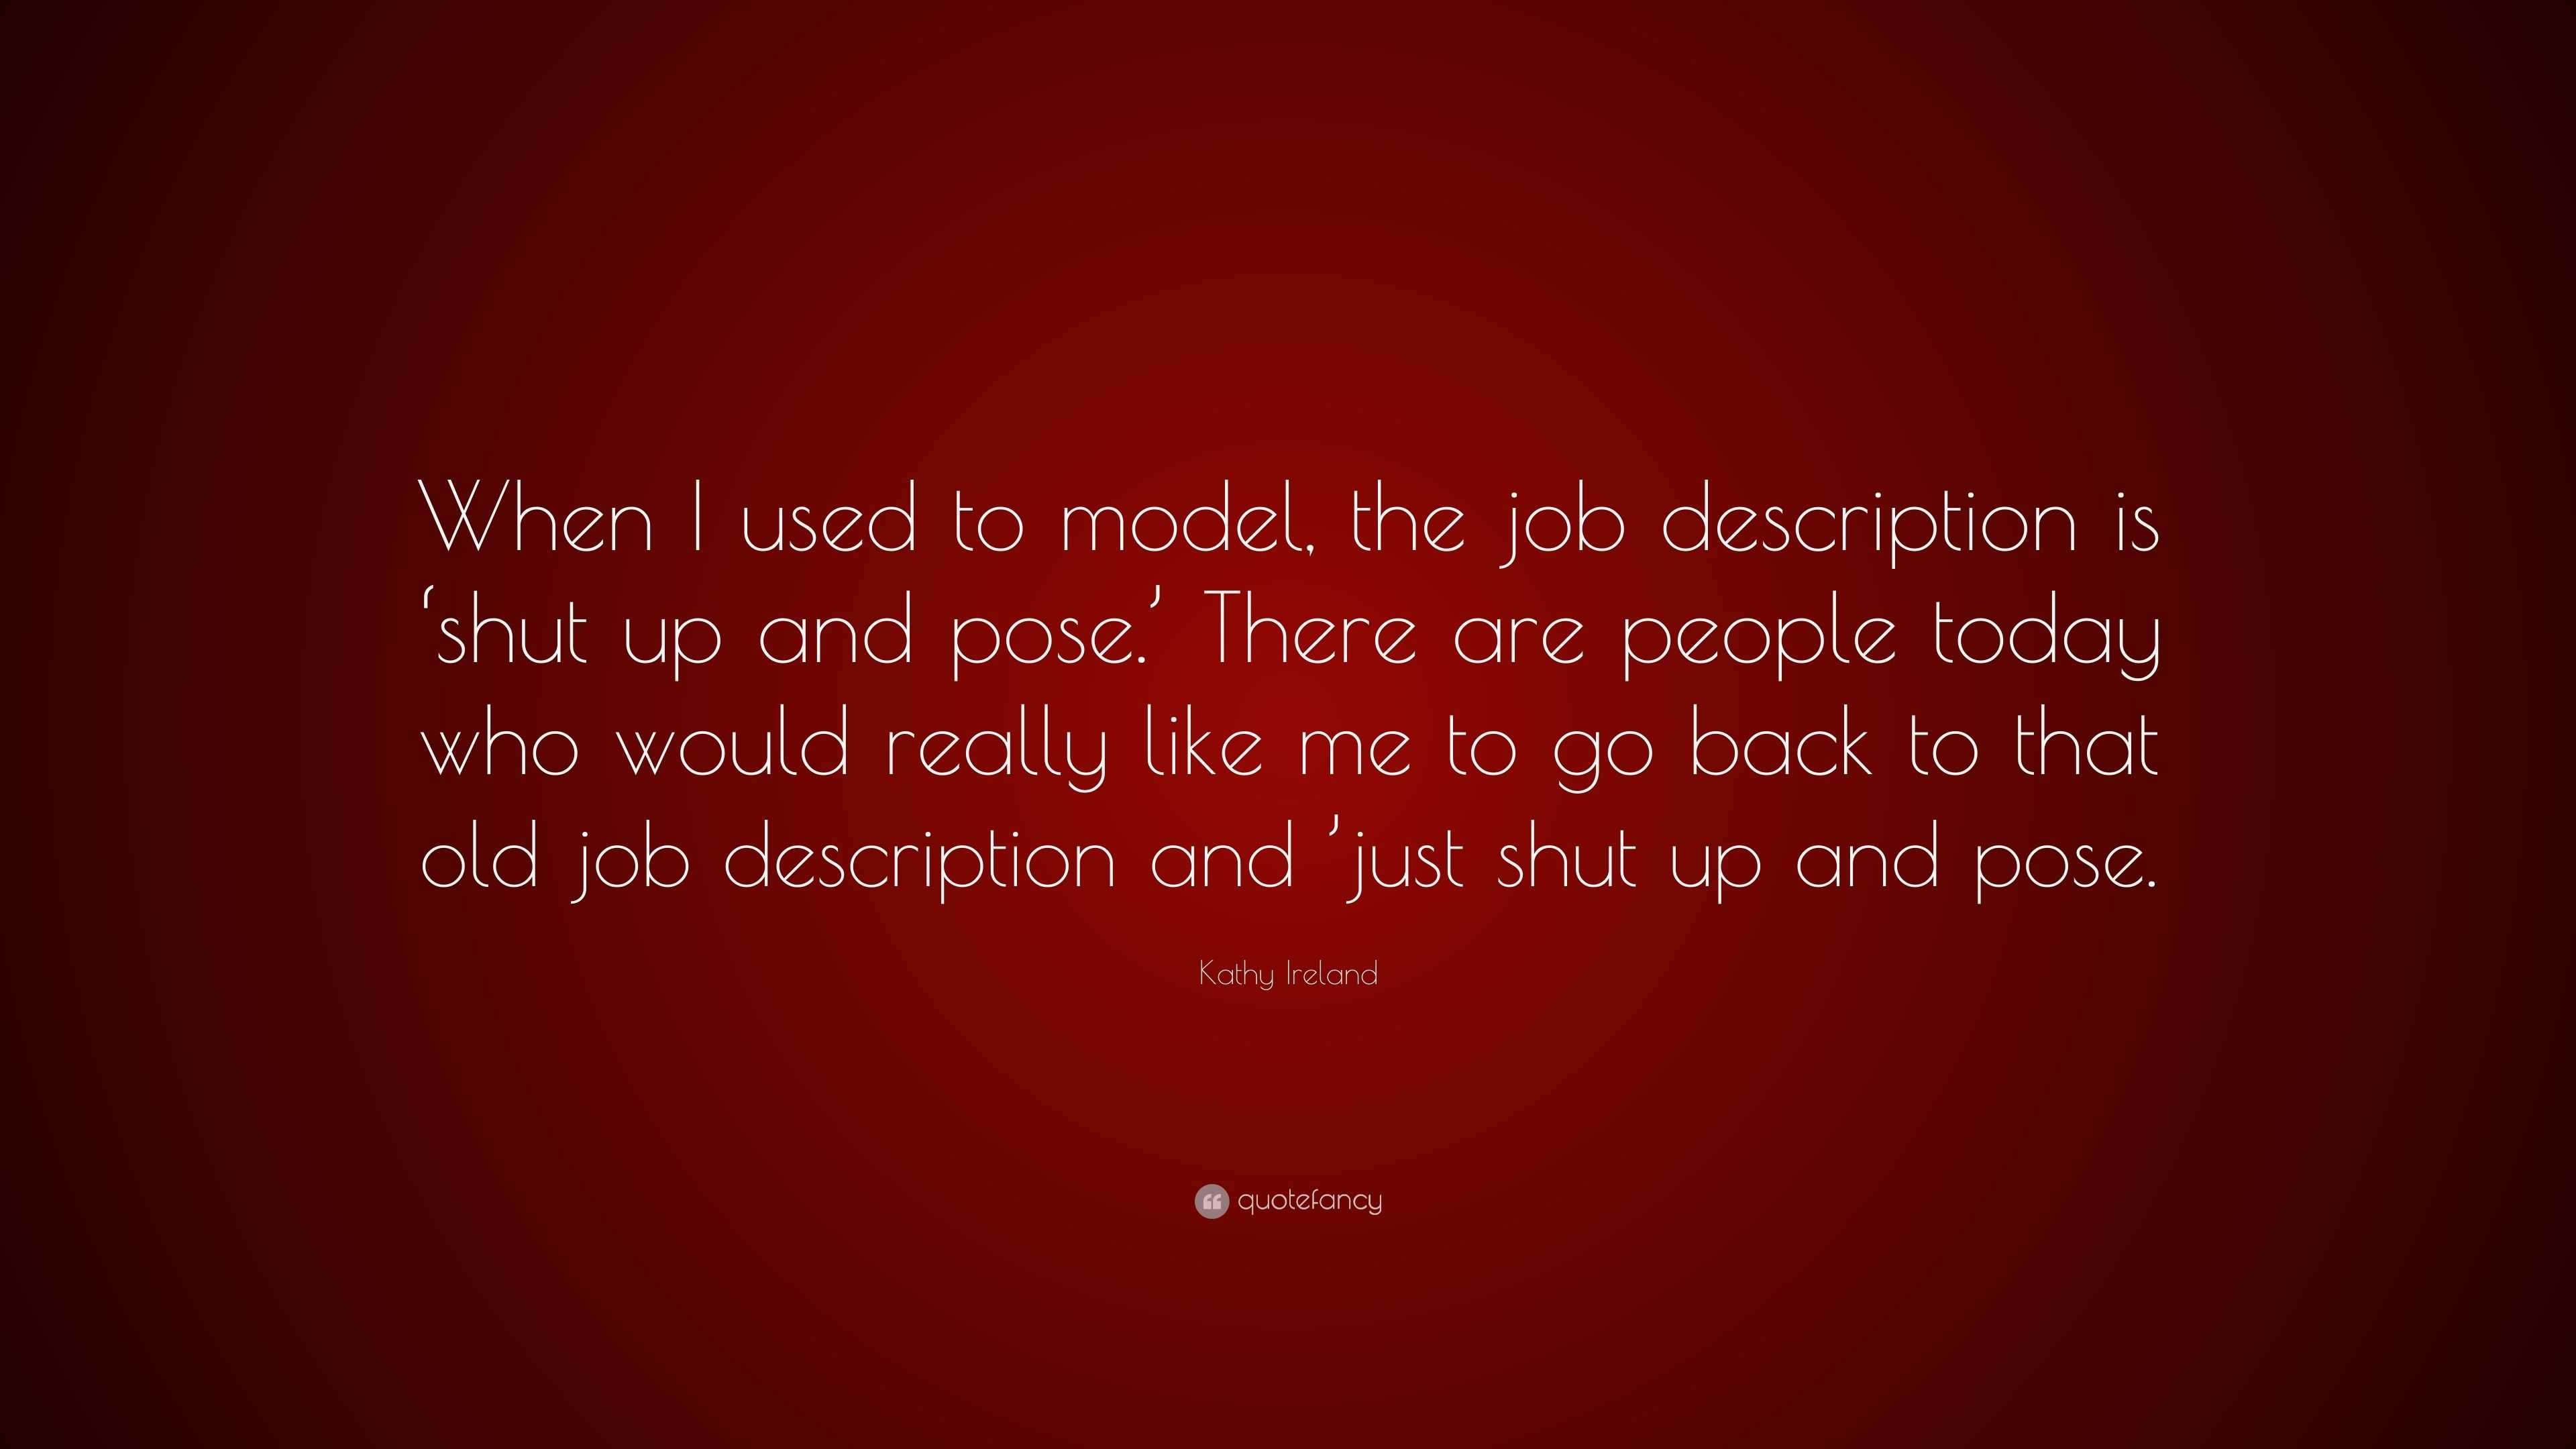 4356757 Kathy Ireland Quote When I used to model the job description is